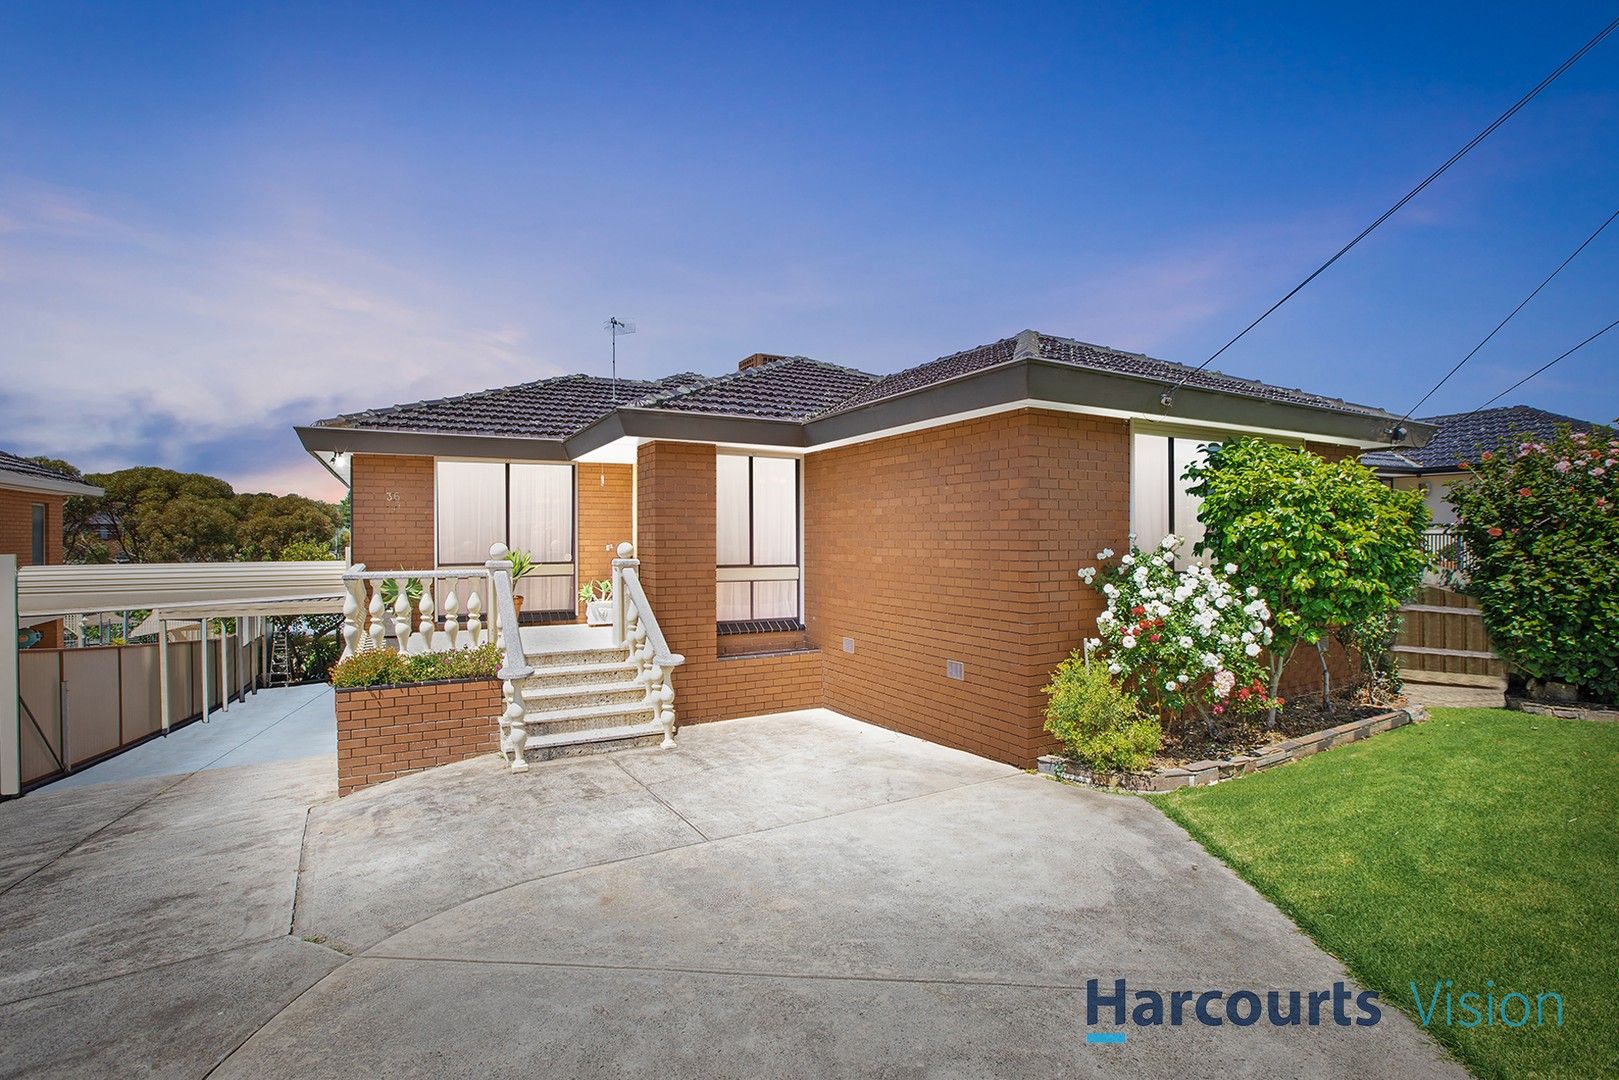 4 bedrooms House in 36 Montpellier Drive AVONDALE HEIGHTS VIC, 3034